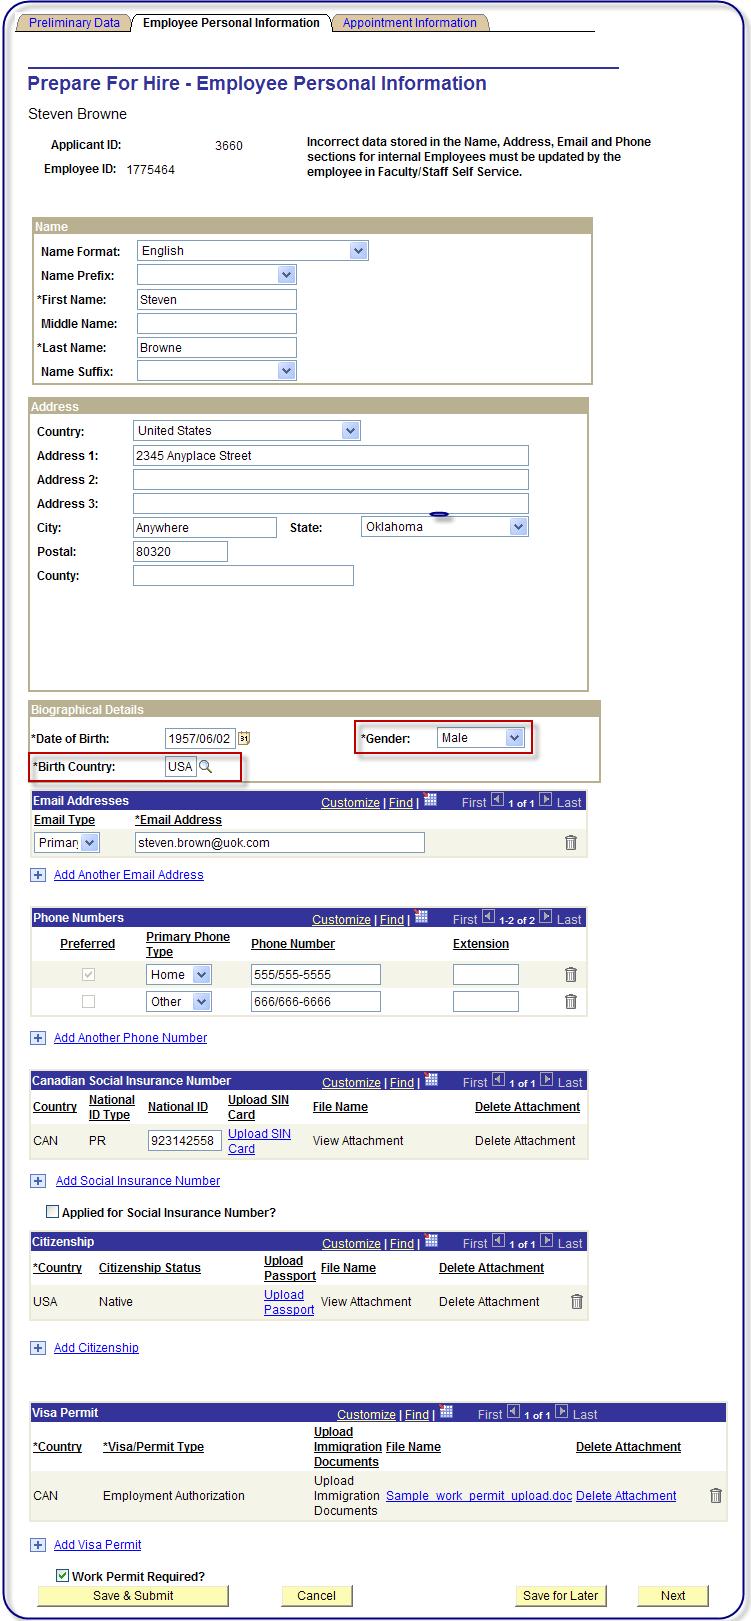 Prepare Applicant for Hire Complete required fields in Employee Personal Information page.